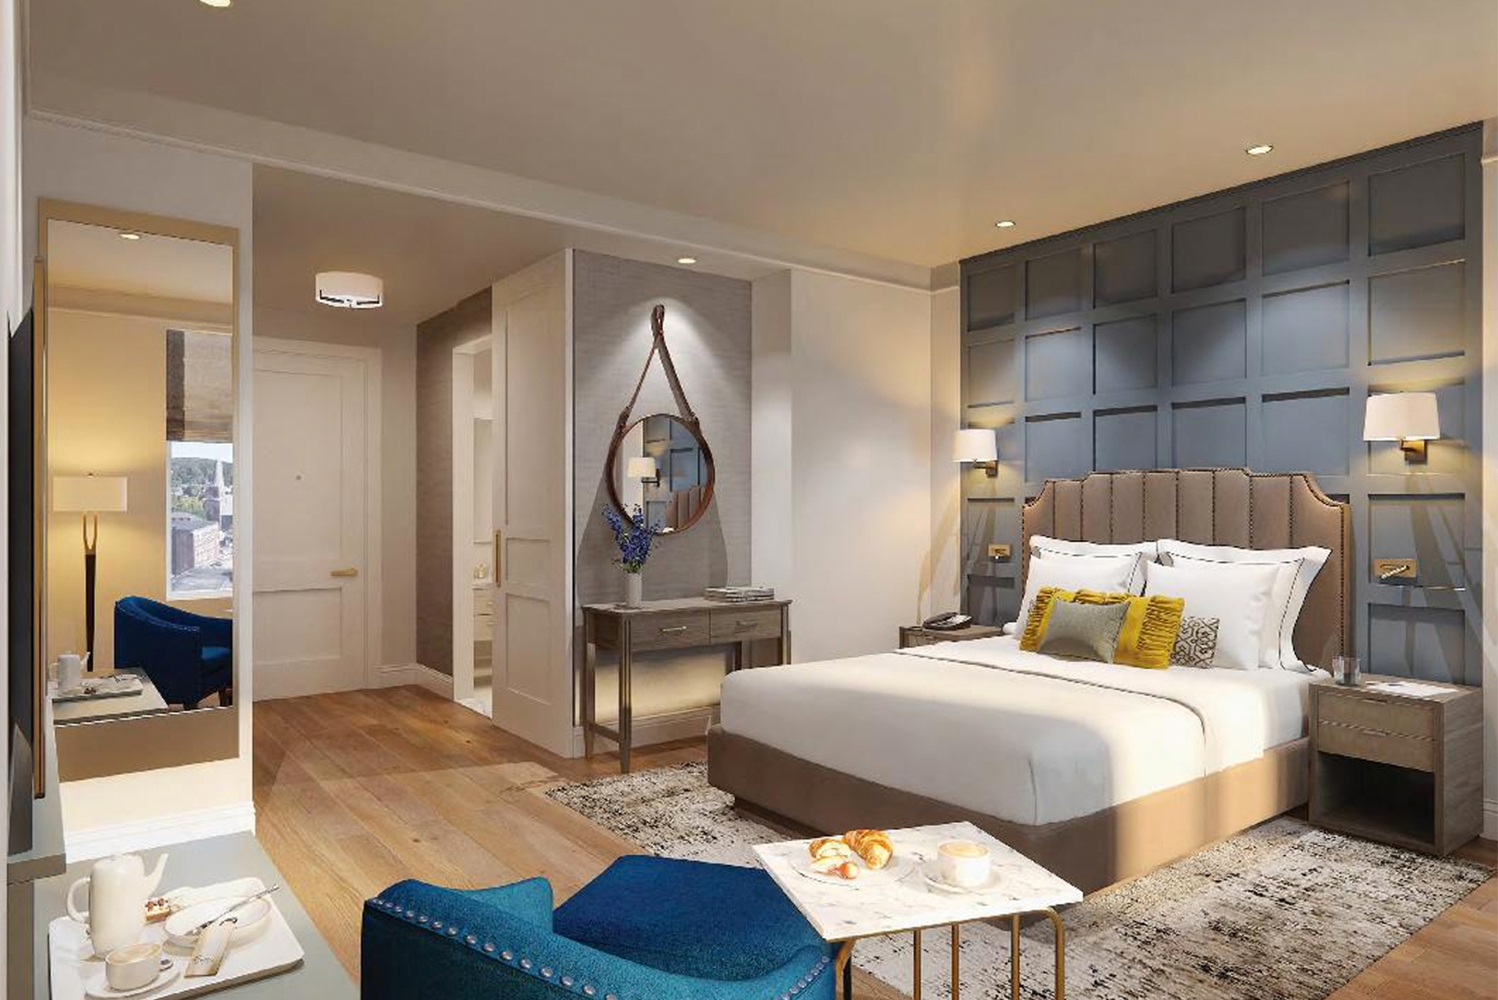 The Hotel Concord is scheduled to open as a 38-room hotel in New Hampshire this August 24